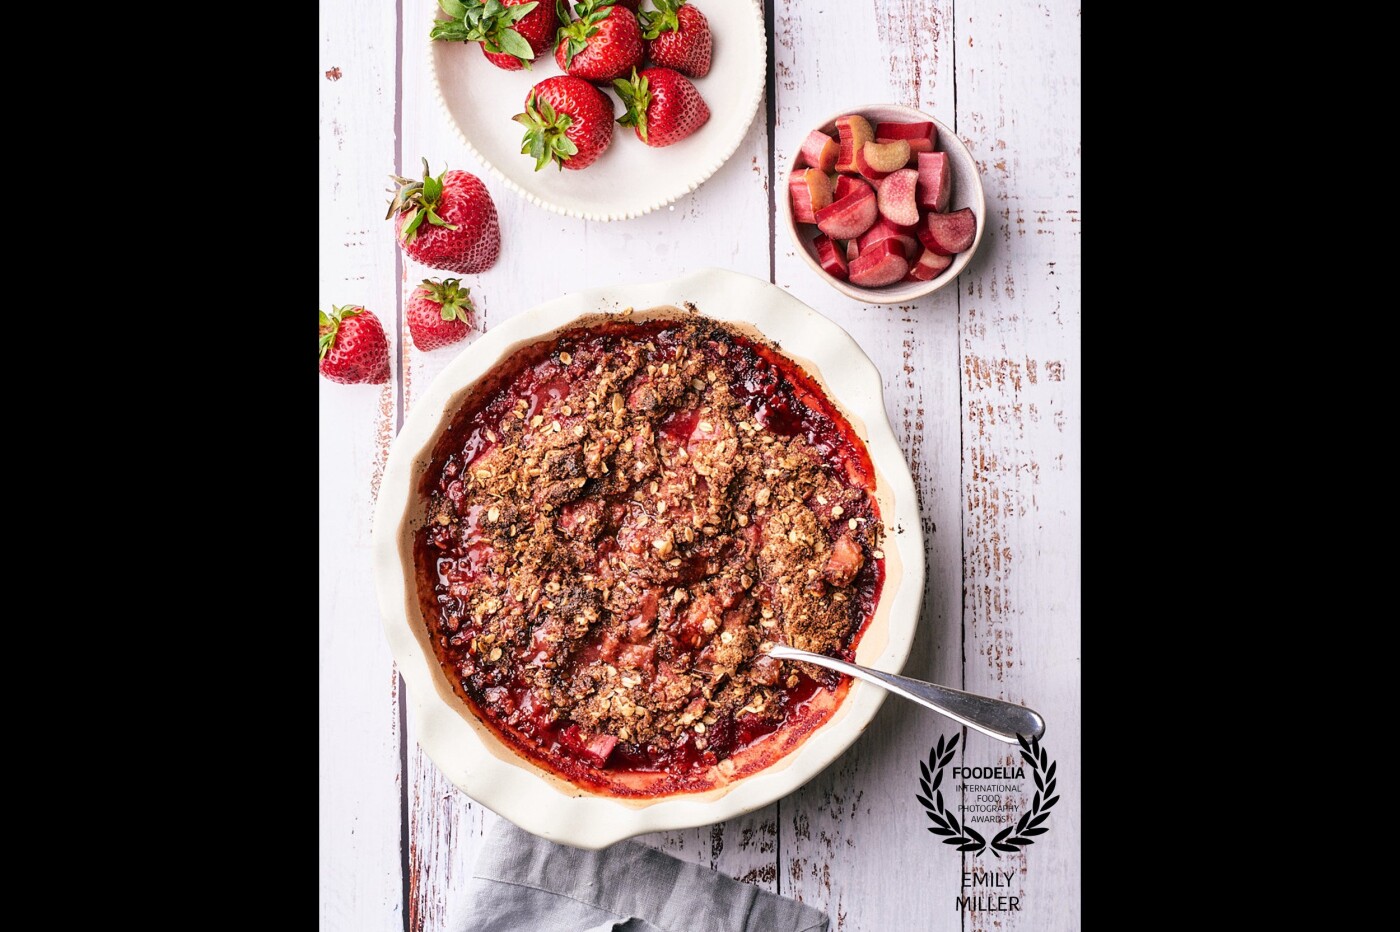 This is a vegan gluten-free strawberry and rhubarb crisp that I shot overhead with a Nikon D810, 50mm/1.8 lens, ISO 100, 1/60 sec, f/8. Godox SK400ii. I let this crisp bake just a few minutes too long, but it still tasted great!